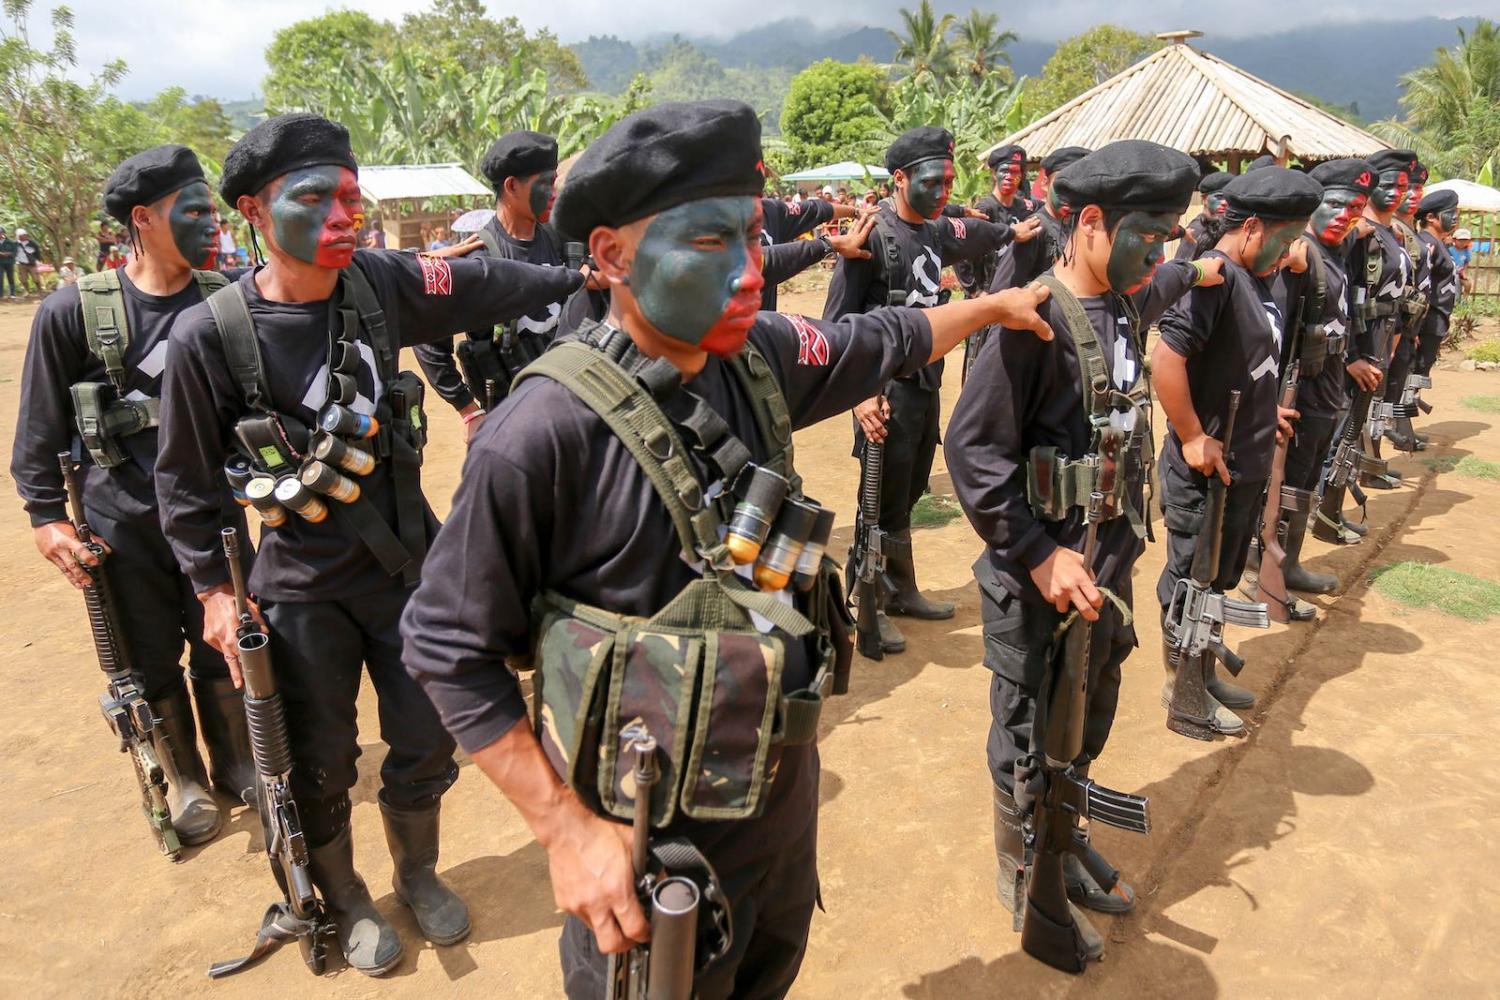 Insurgent group the New People’s Army has sought to foment a communist revolution in the rural regions of the Philippines (Photo: Manman Dejeto via Getty)